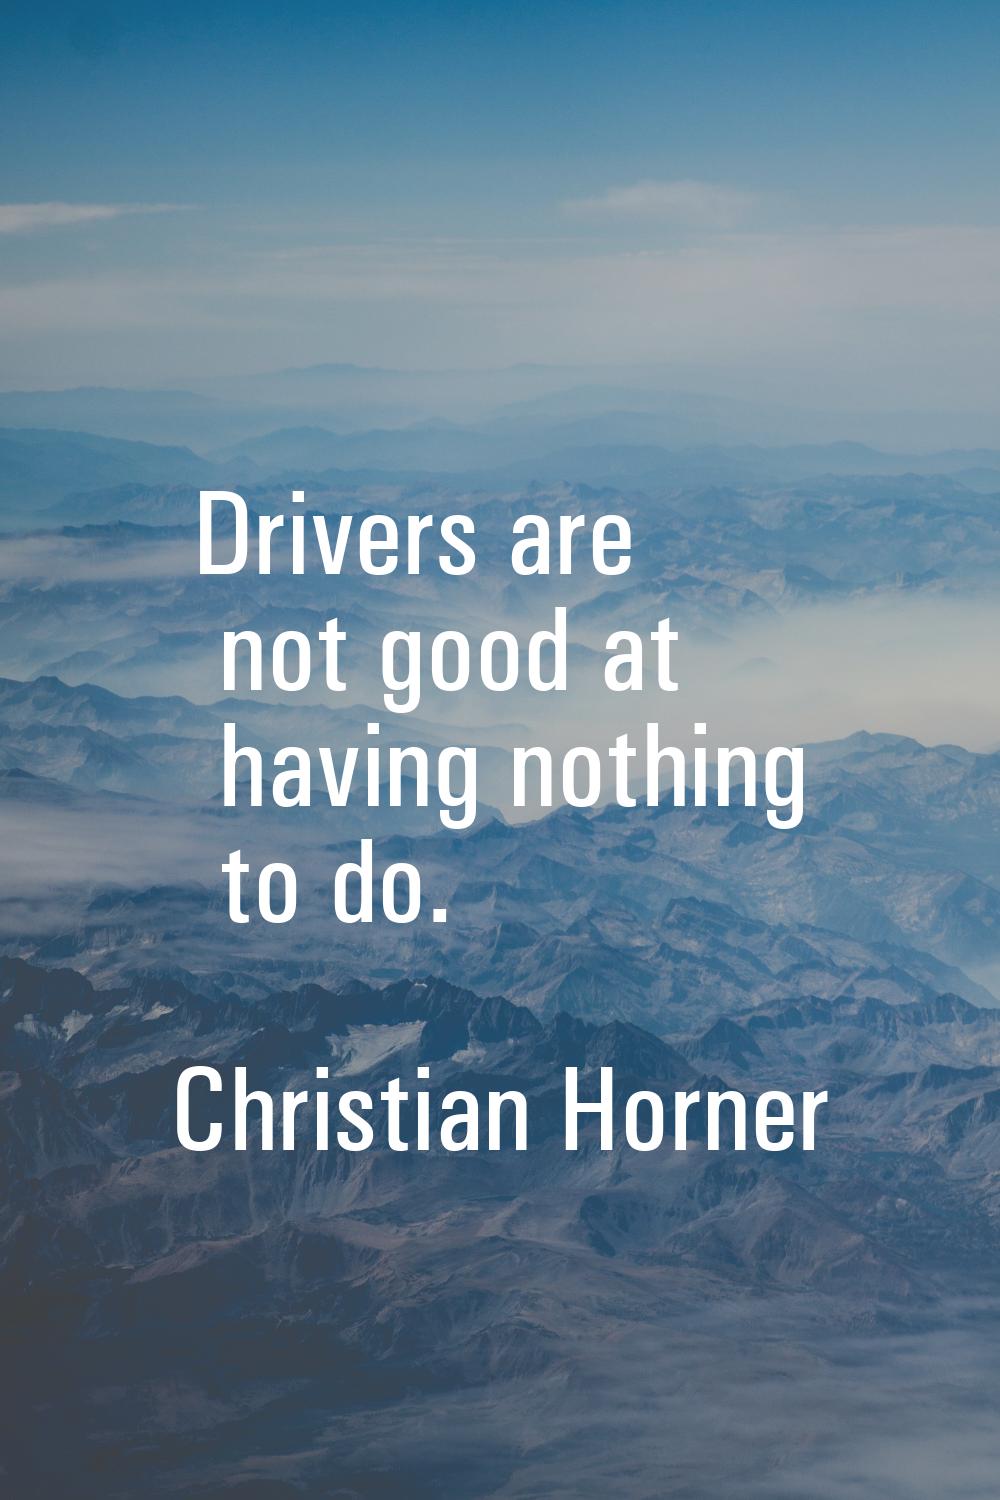 Drivers are not good at having nothing to do.